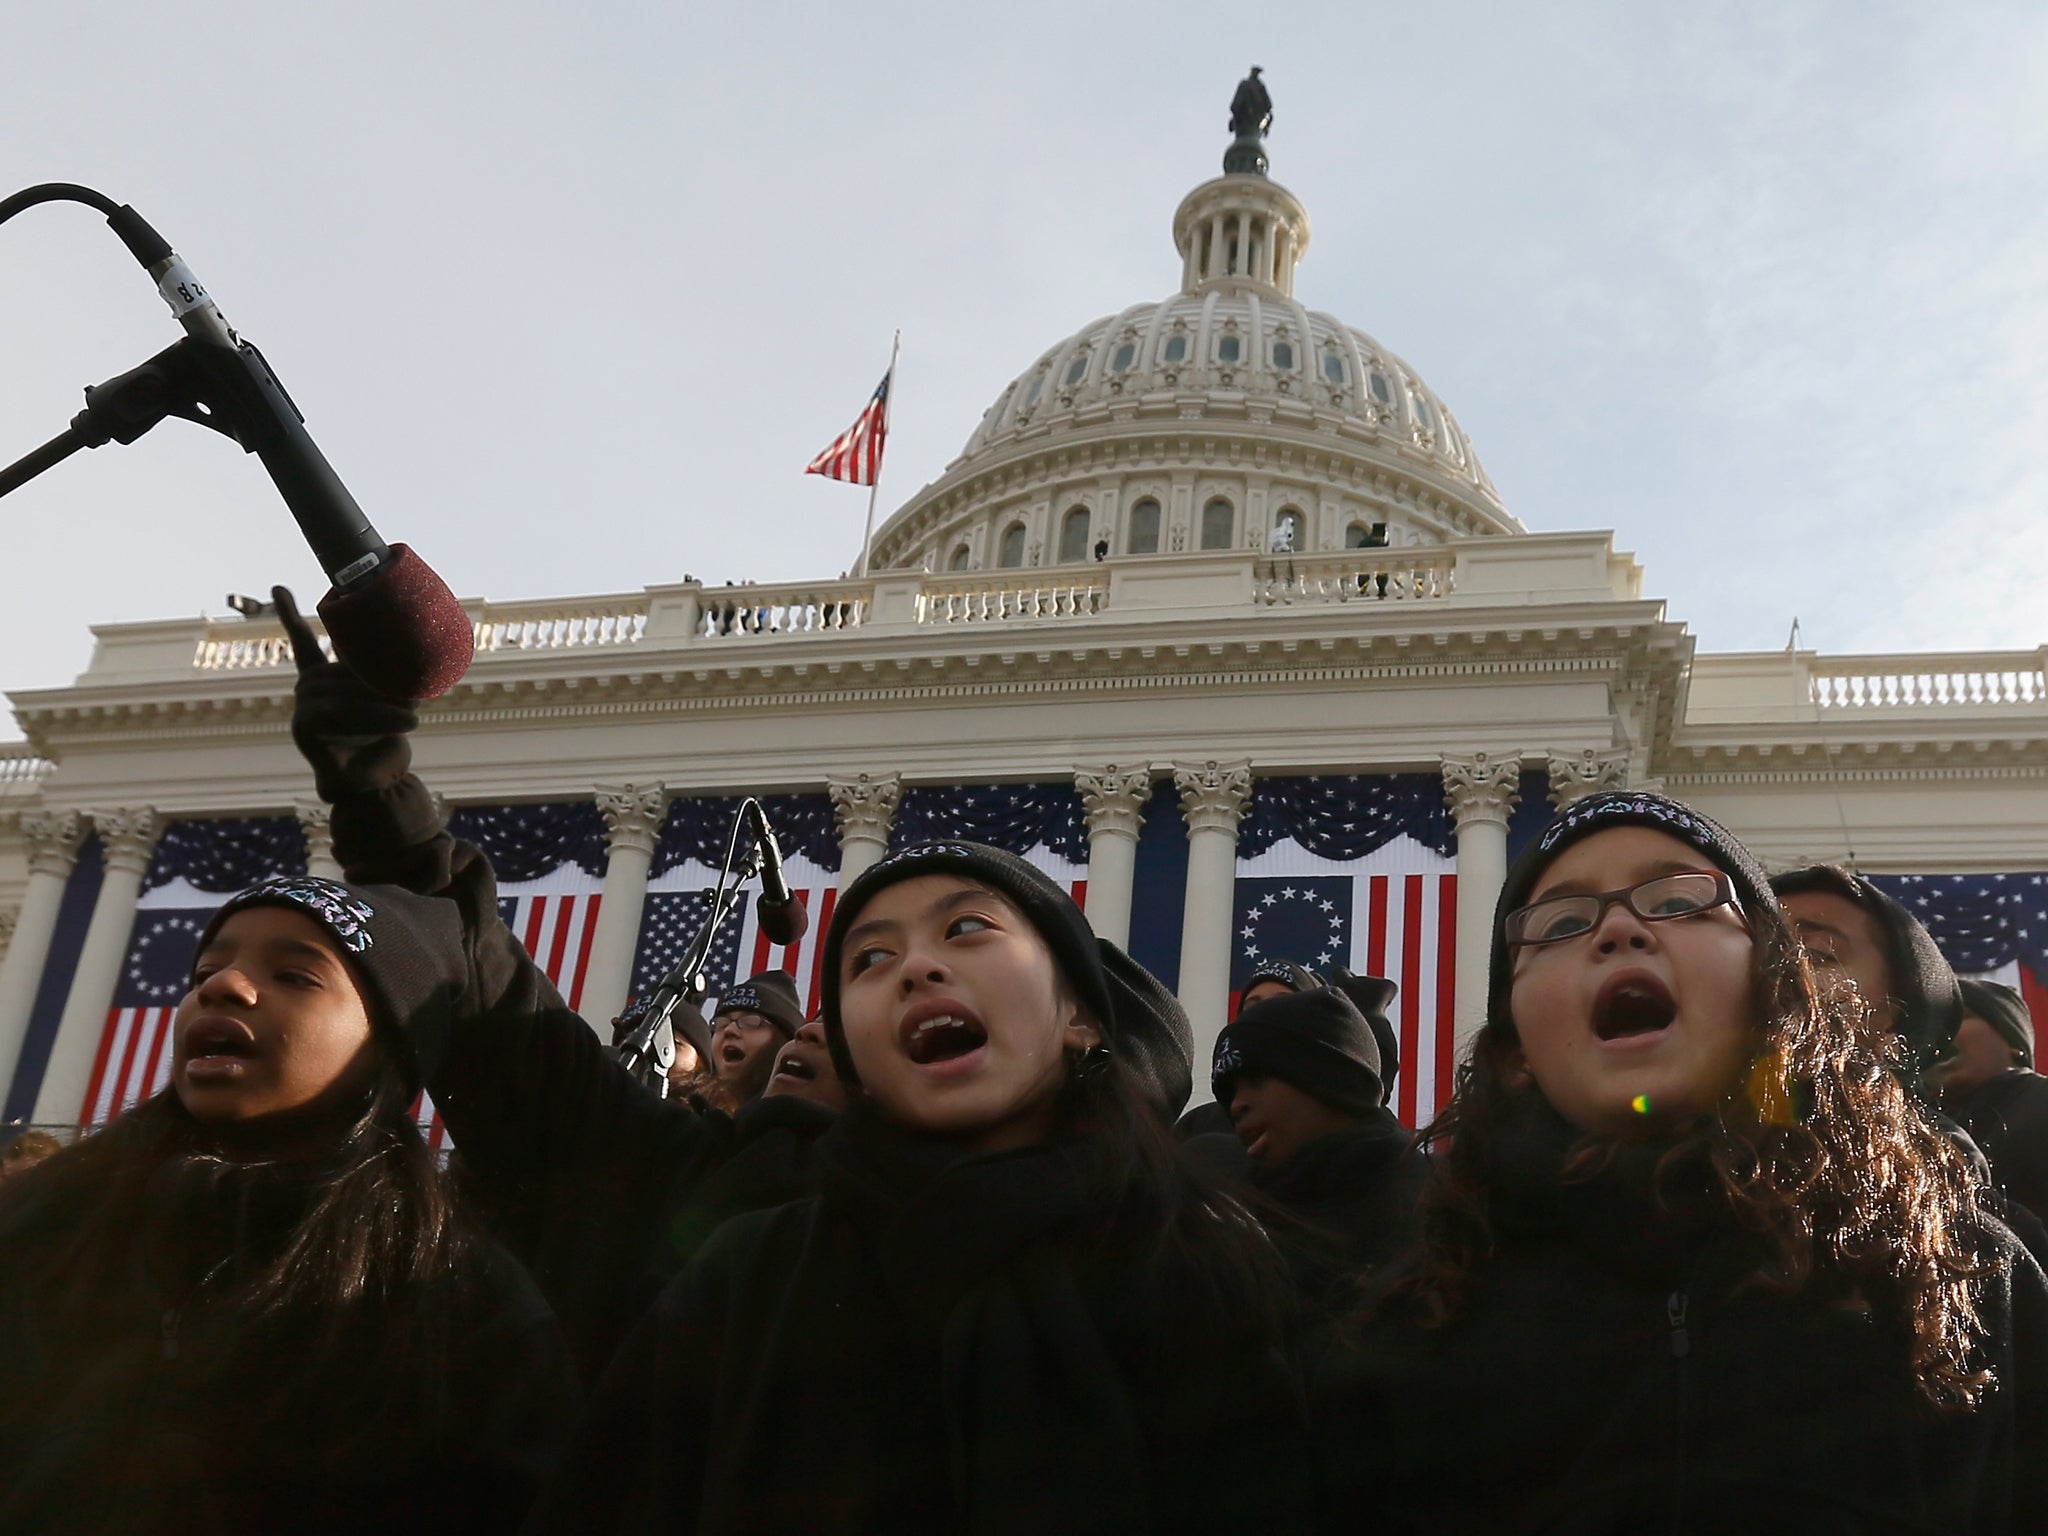 The PS 22 choir from Staten Island, New York perform during the presidential inauguration on the West Front of the US Capitol